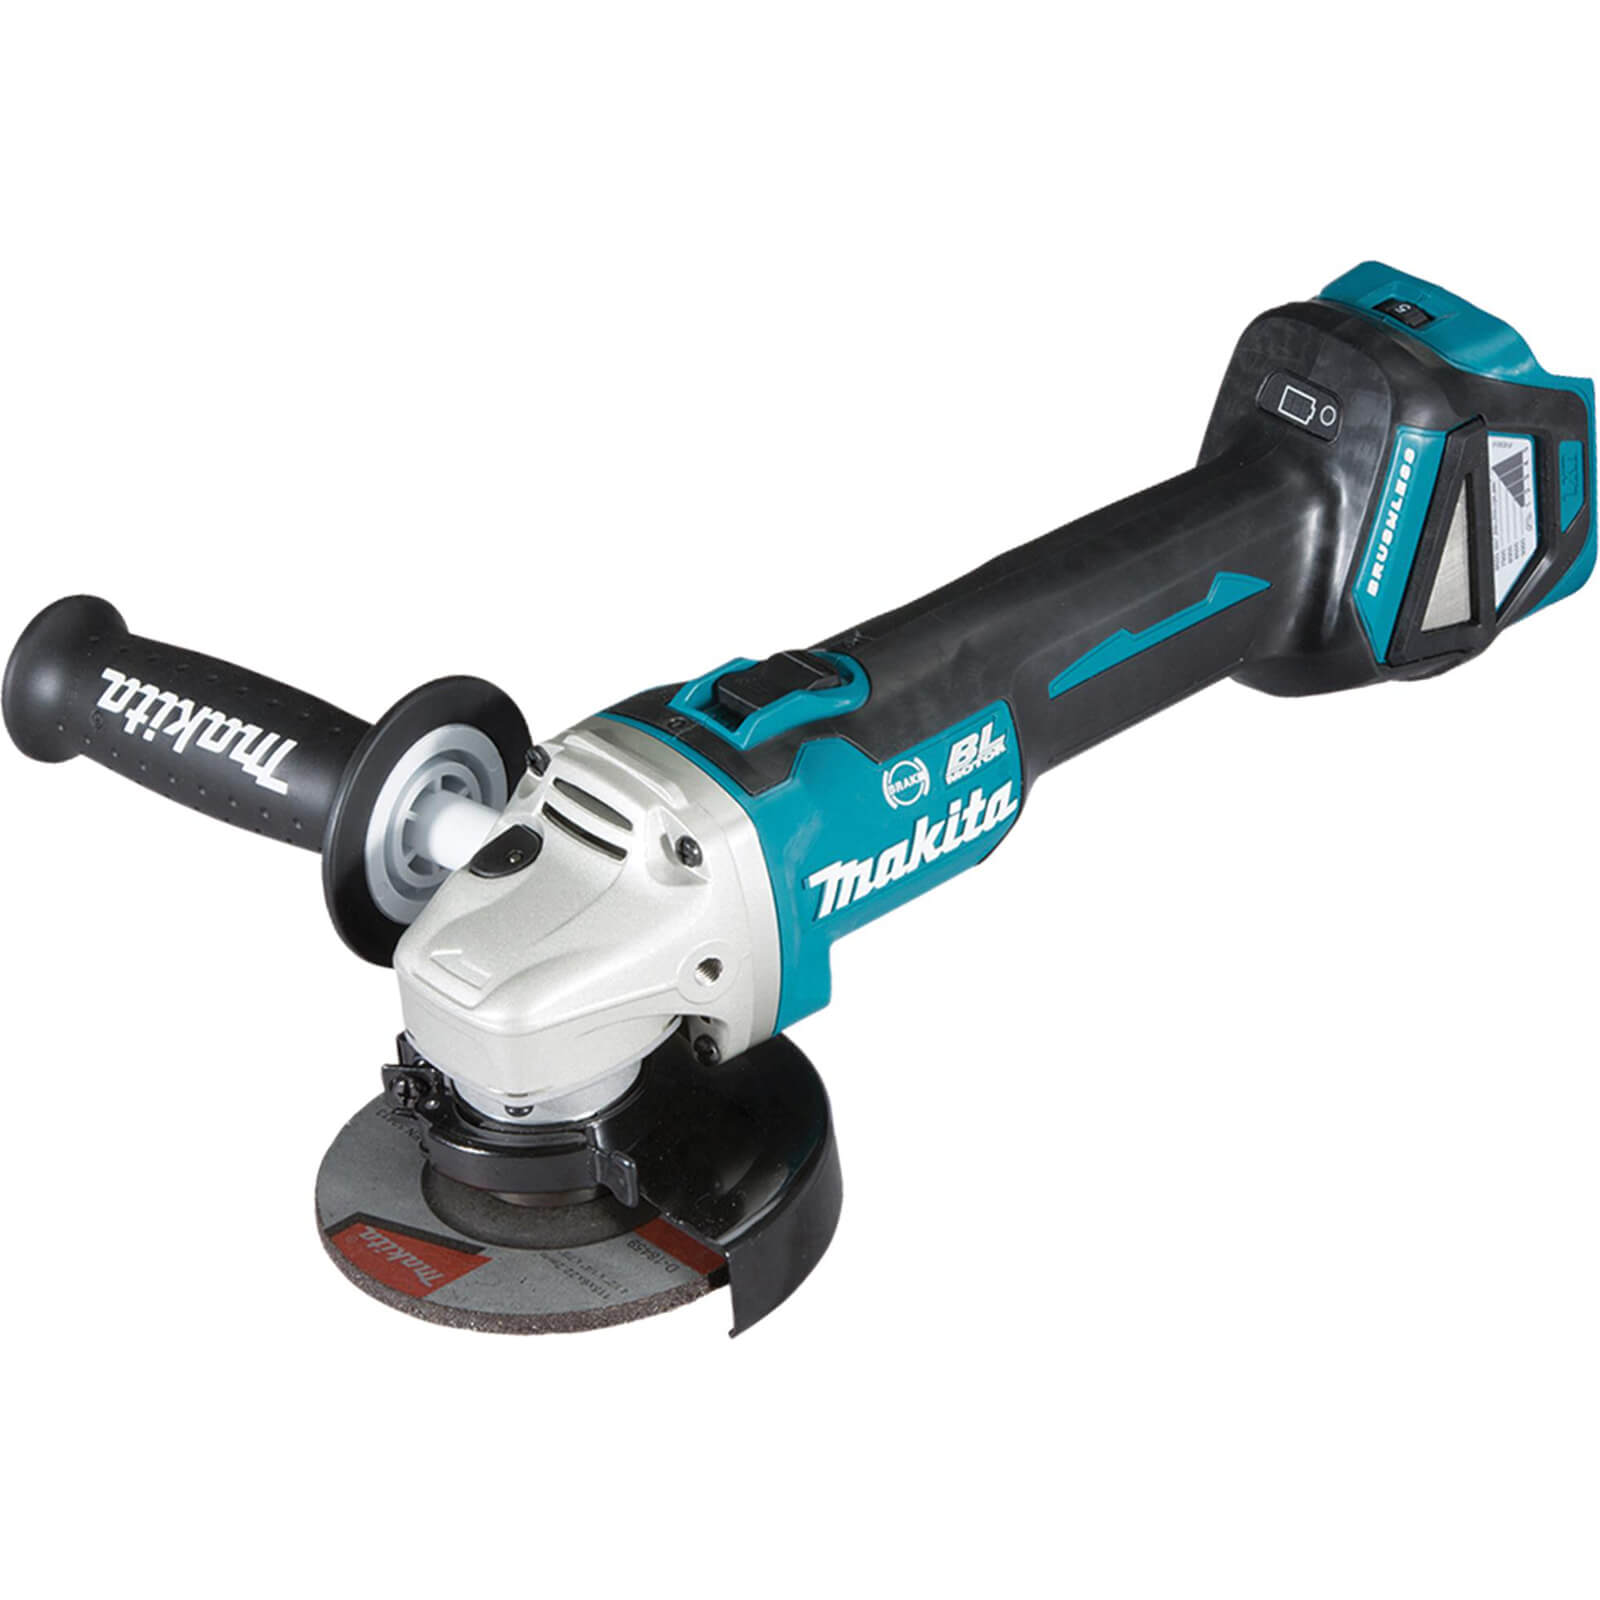 Image of Makita DGA463 18v LXT Cordless Brushless Slide Switch Angle Grinder 115mm No Batteries No Charger No Case